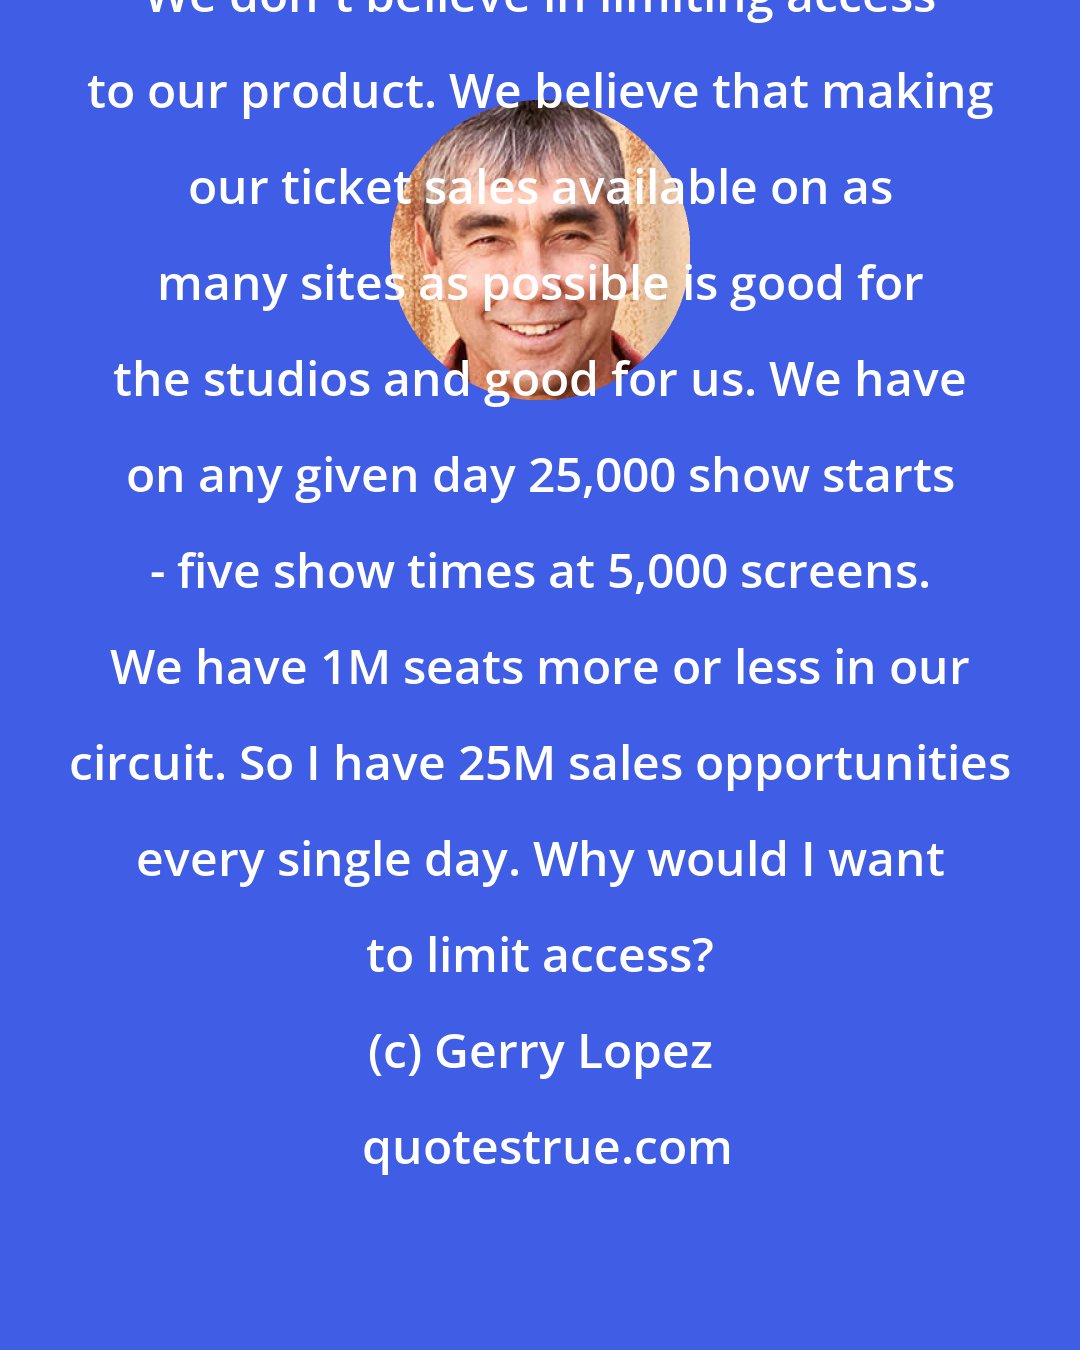 Gerry Lopez: We don't believe in limiting access to our product. We believe that making our ticket sales available on as many sites as possible is good for the studios and good for us. We have on any given day 25,000 show starts - five show times at 5,000 screens. We have 1M seats more or less in our circuit. So I have 25M sales opportunities every single day. Why would I want to limit access?